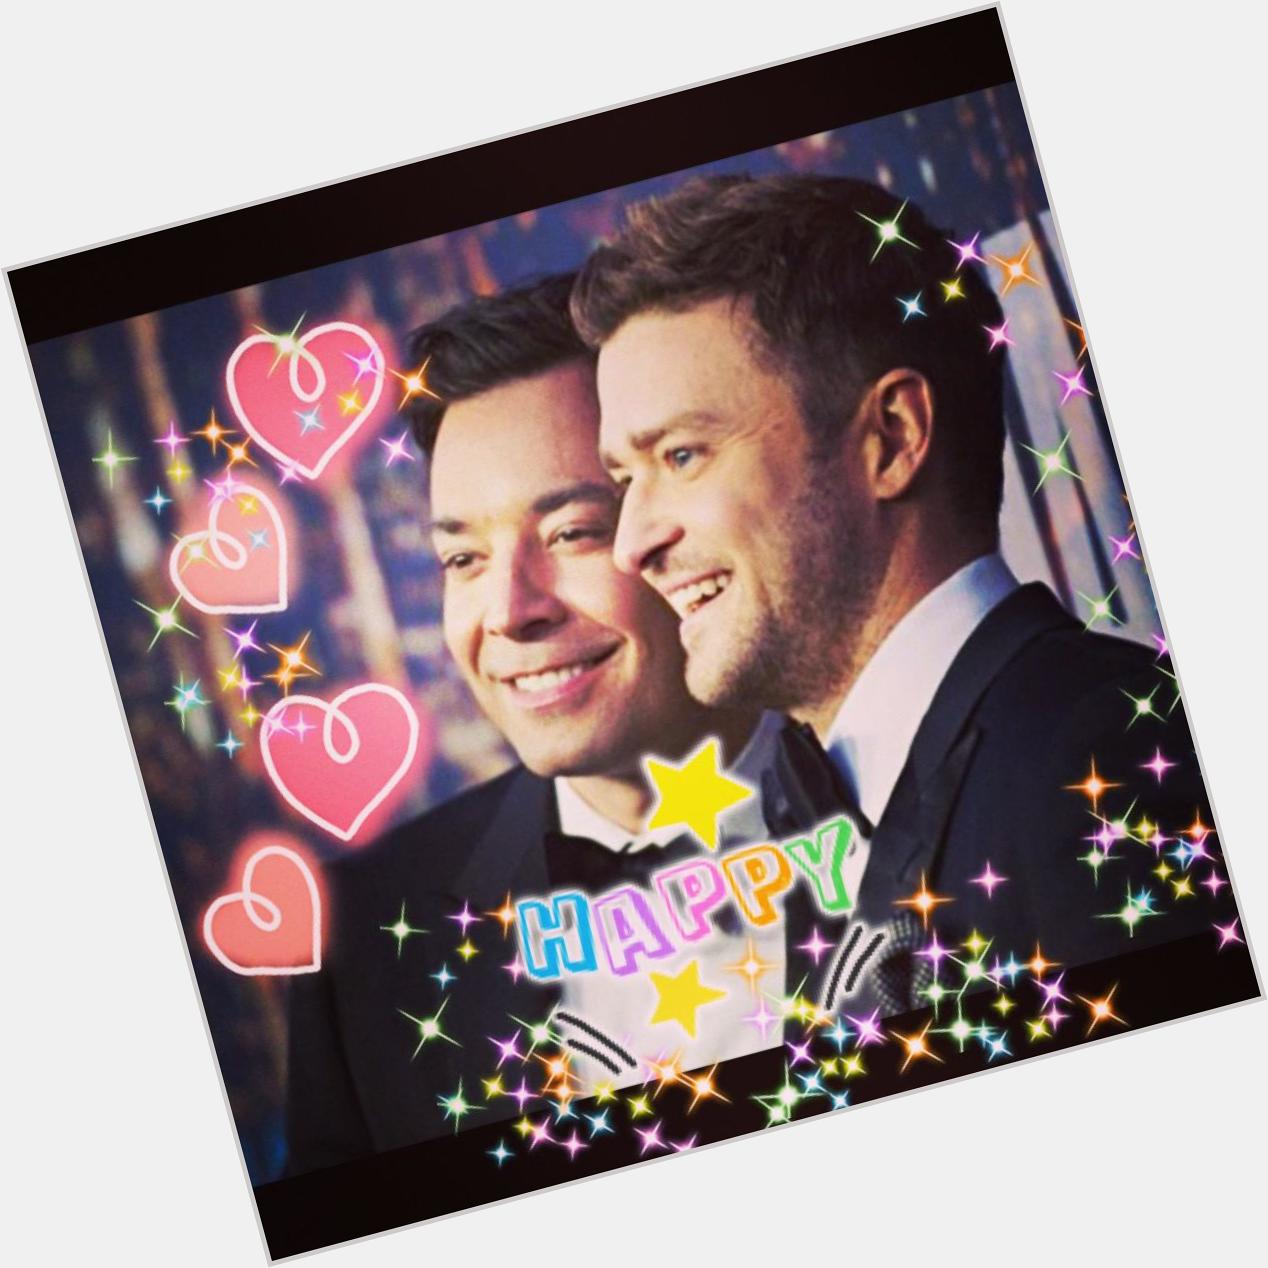 I totally forgot Jimmy Fallon\s birthday! Late Happy Birthday for from a fan :) 